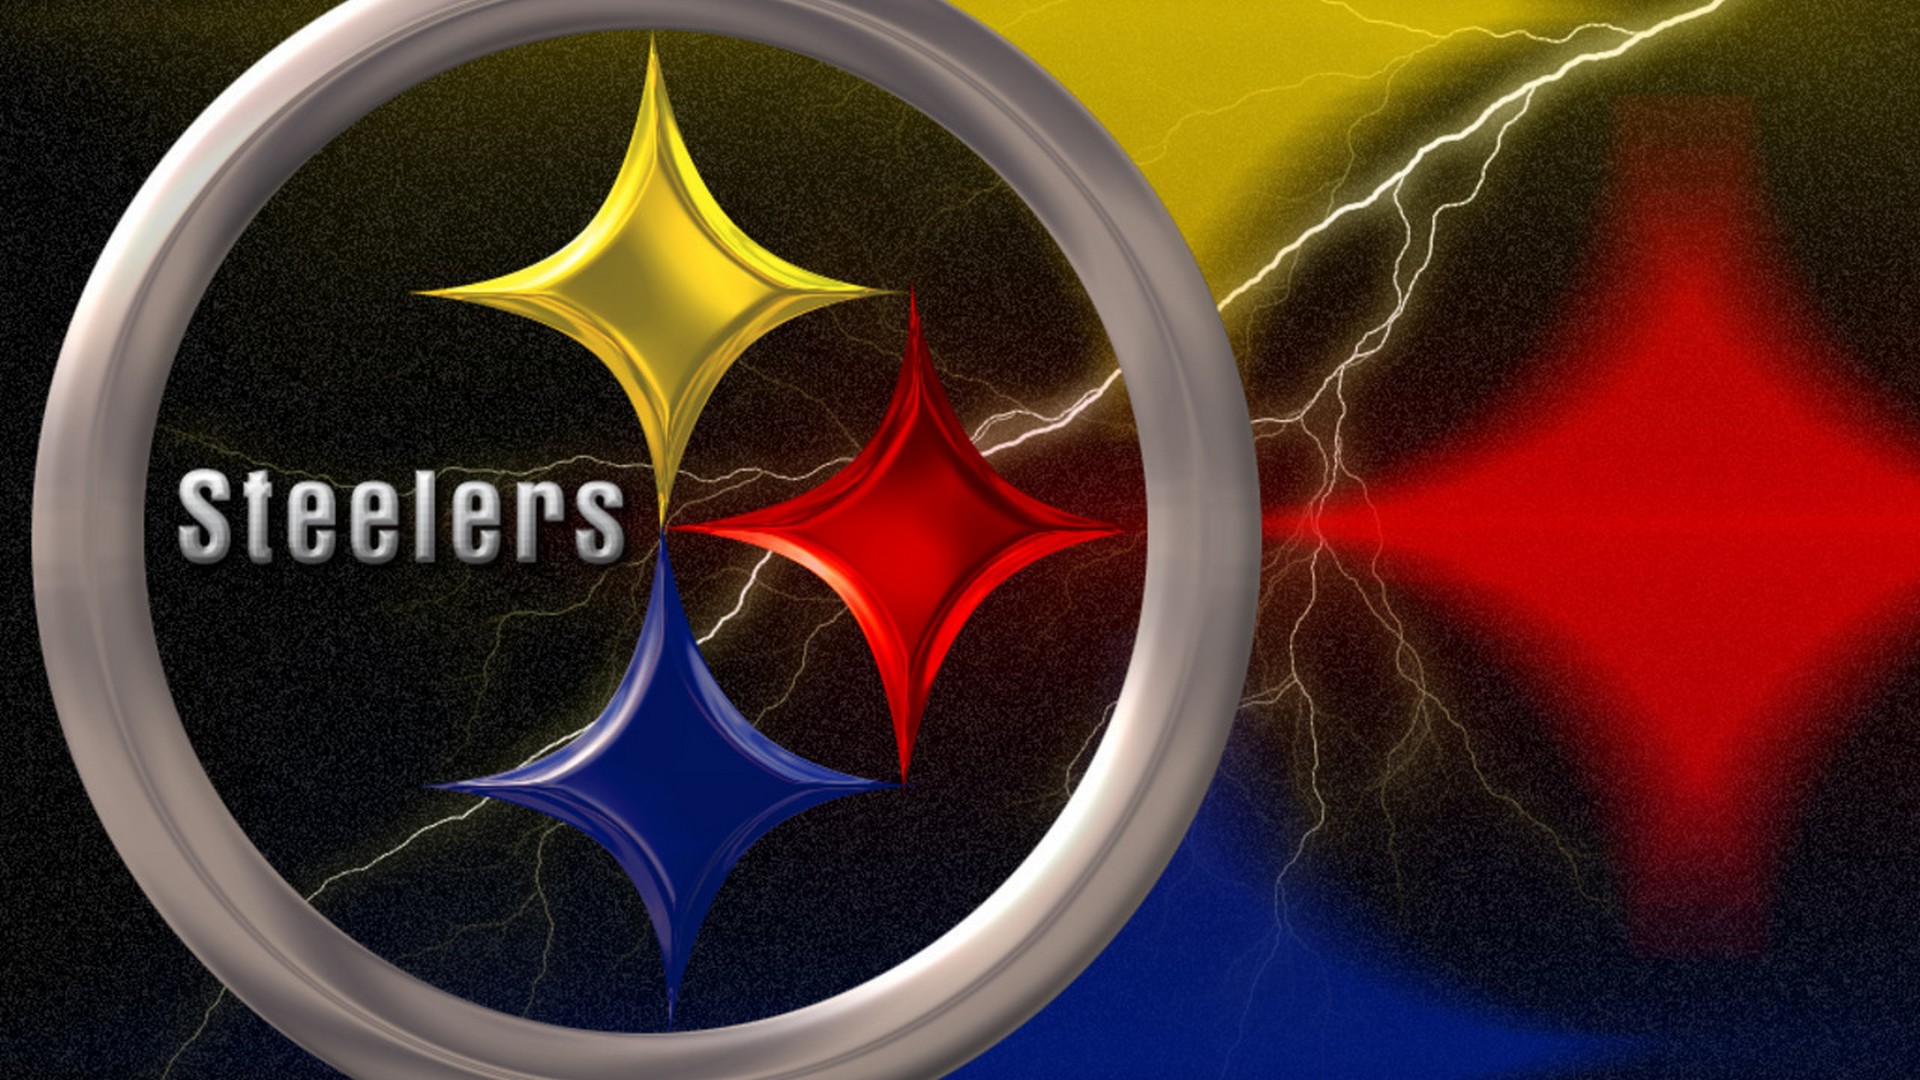 Windows Wallpaper Steelers Football with resolution 1920x1080 pixel. You can make this wallpaper for your Mac or Windows Desktop Background, iPhone, Android or Tablet and another Smartphone device